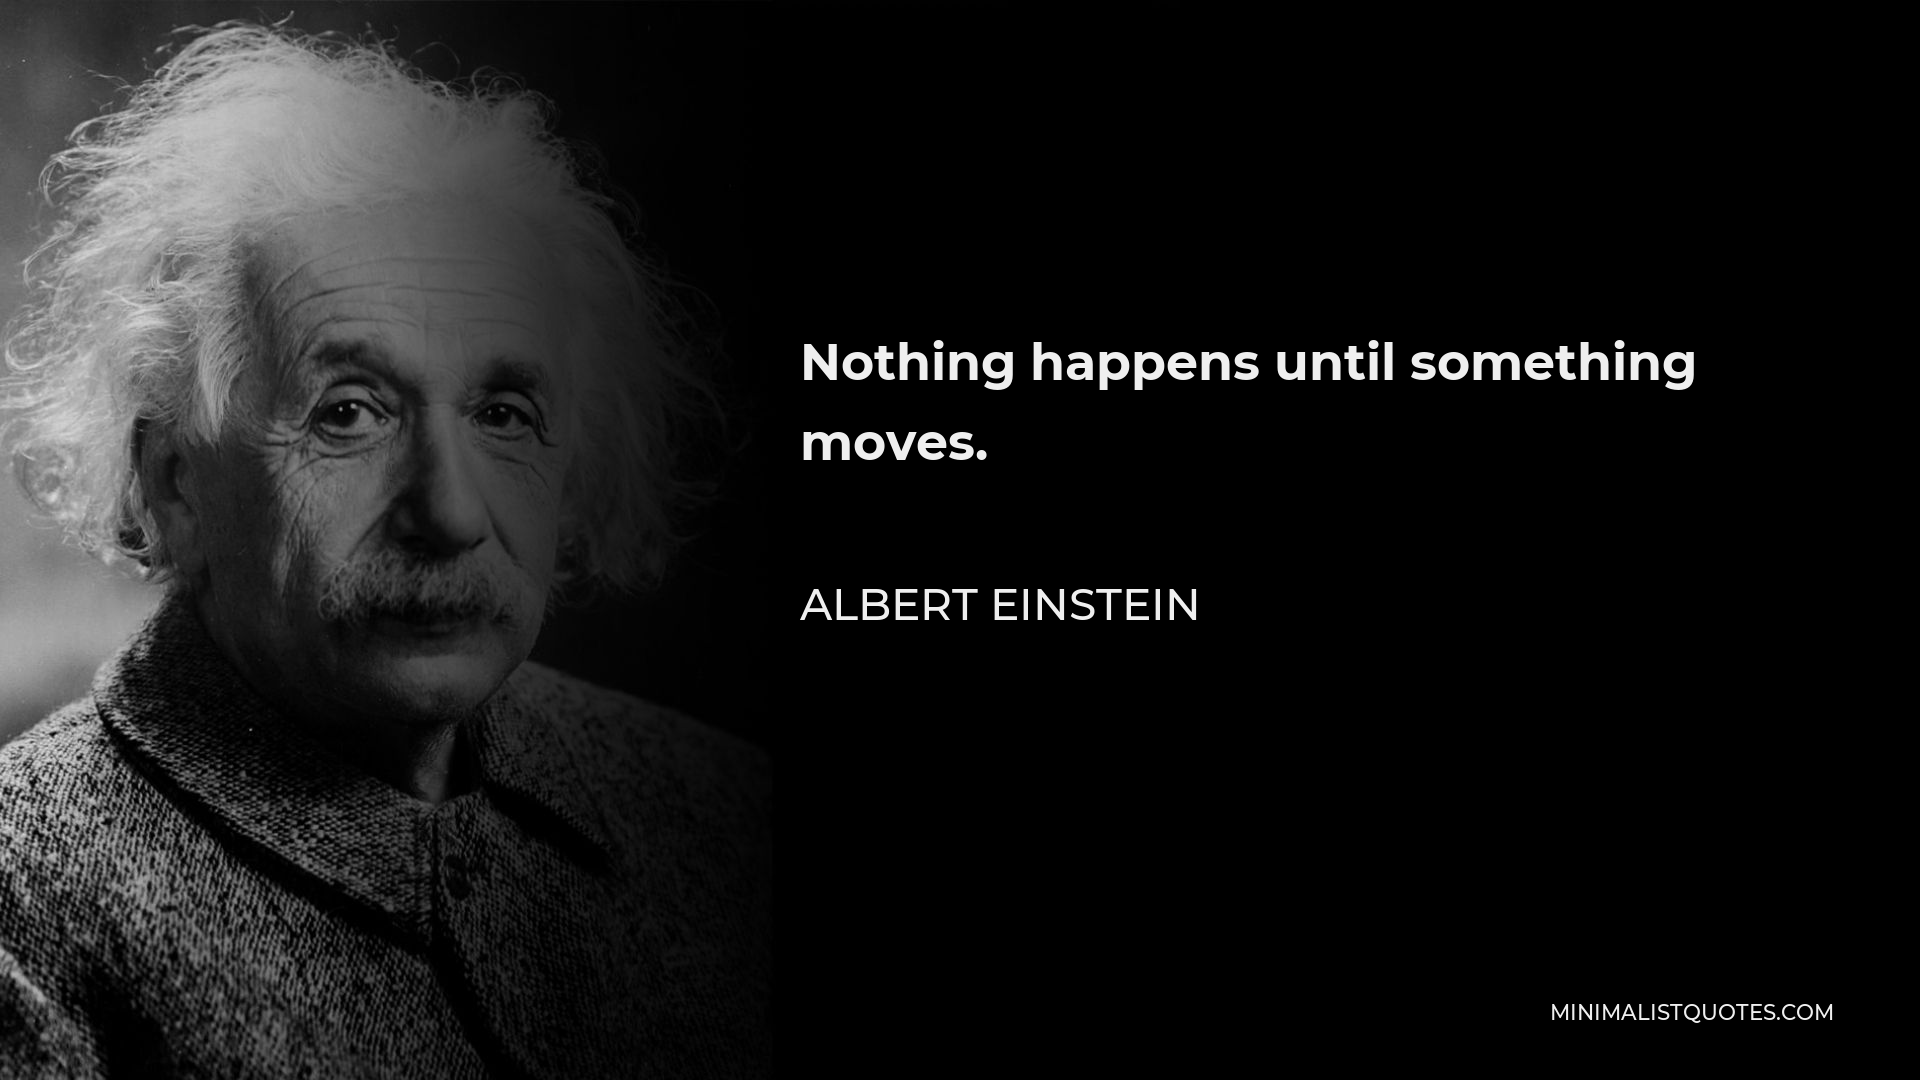 Albert Einstein Quote - Nothing happens until something moves.